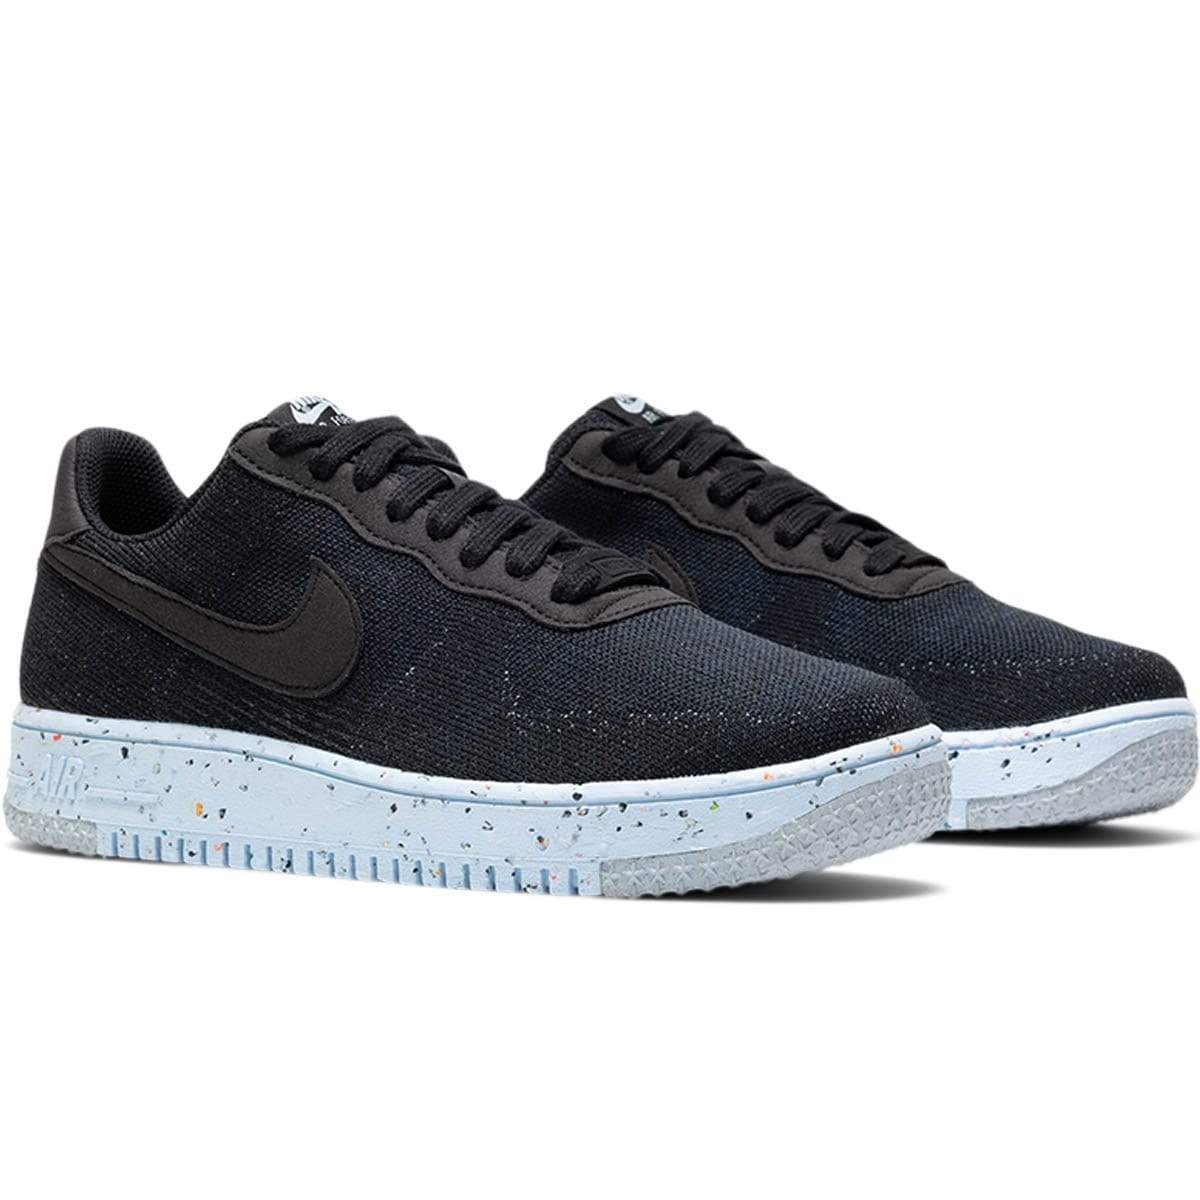 Nike Casual AIR FORCE 1 CRATER FLYKNIT